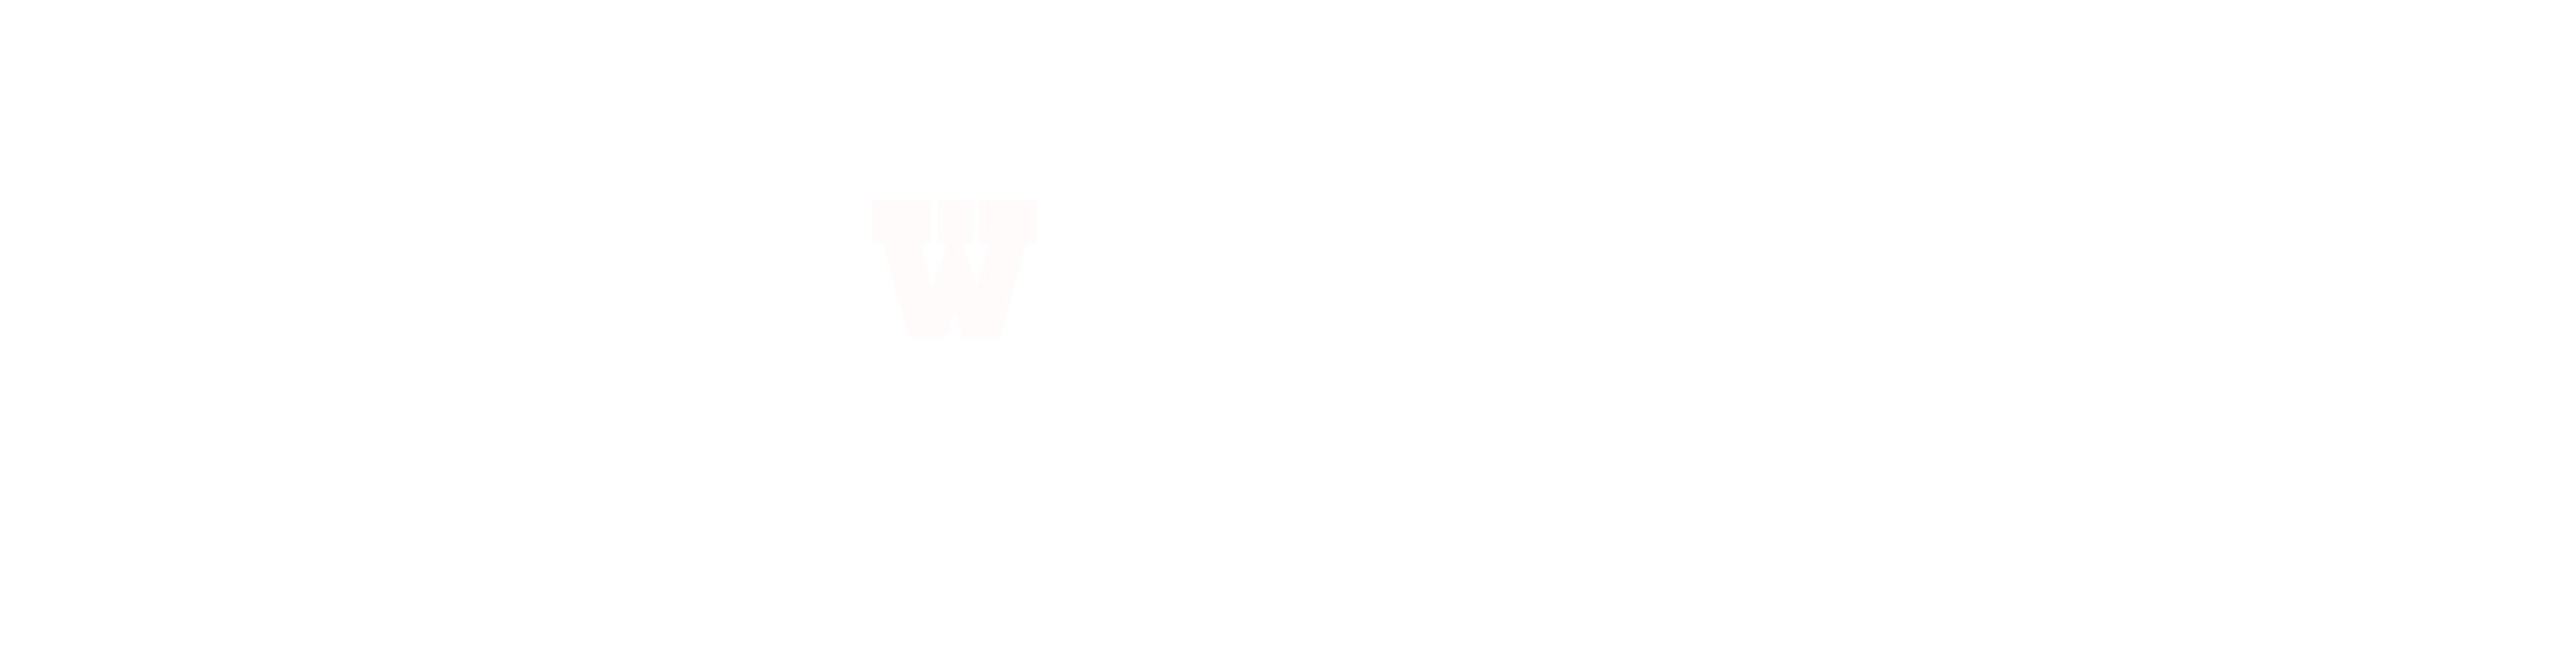 Footer Logo for West Lutheran High School